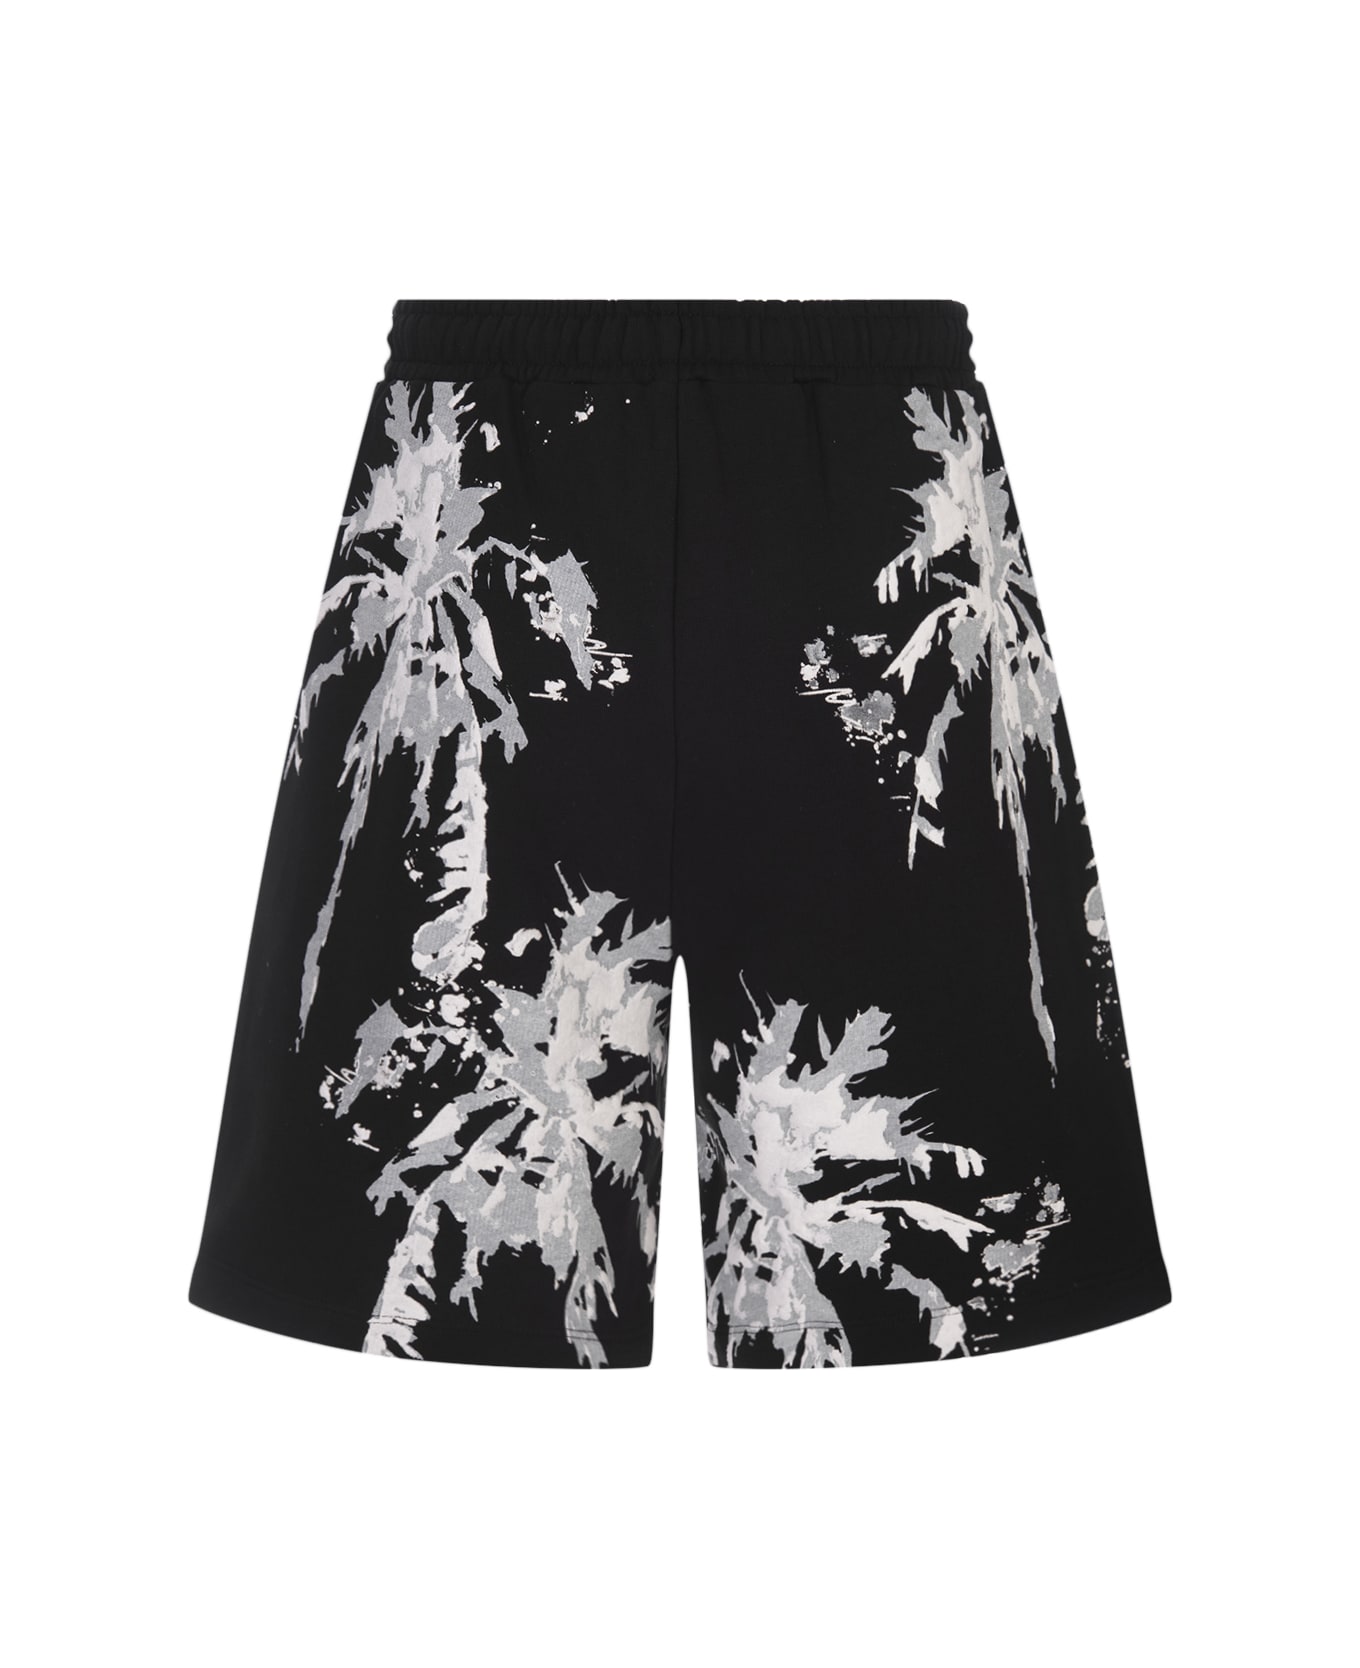 Barrow Black Shorts With Palms Graphic Print